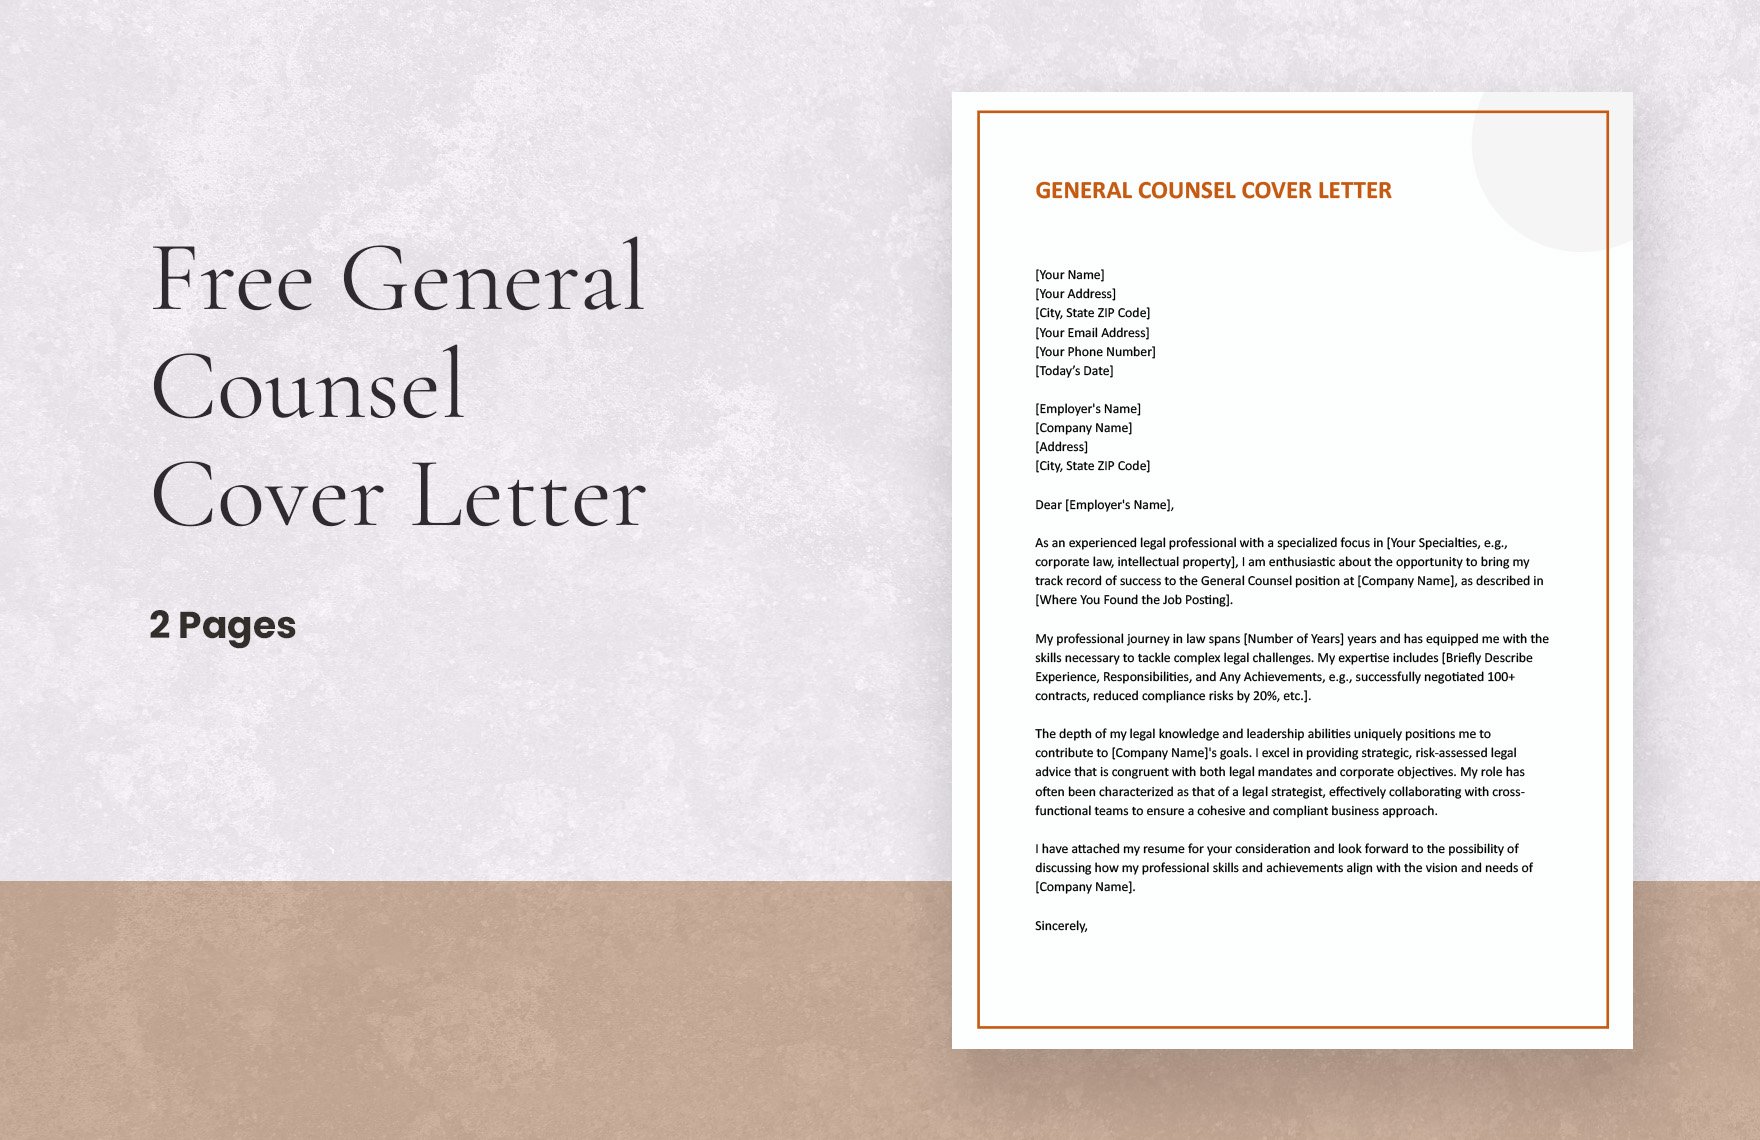 General Counsel Cover Letter in Word, Google Docs